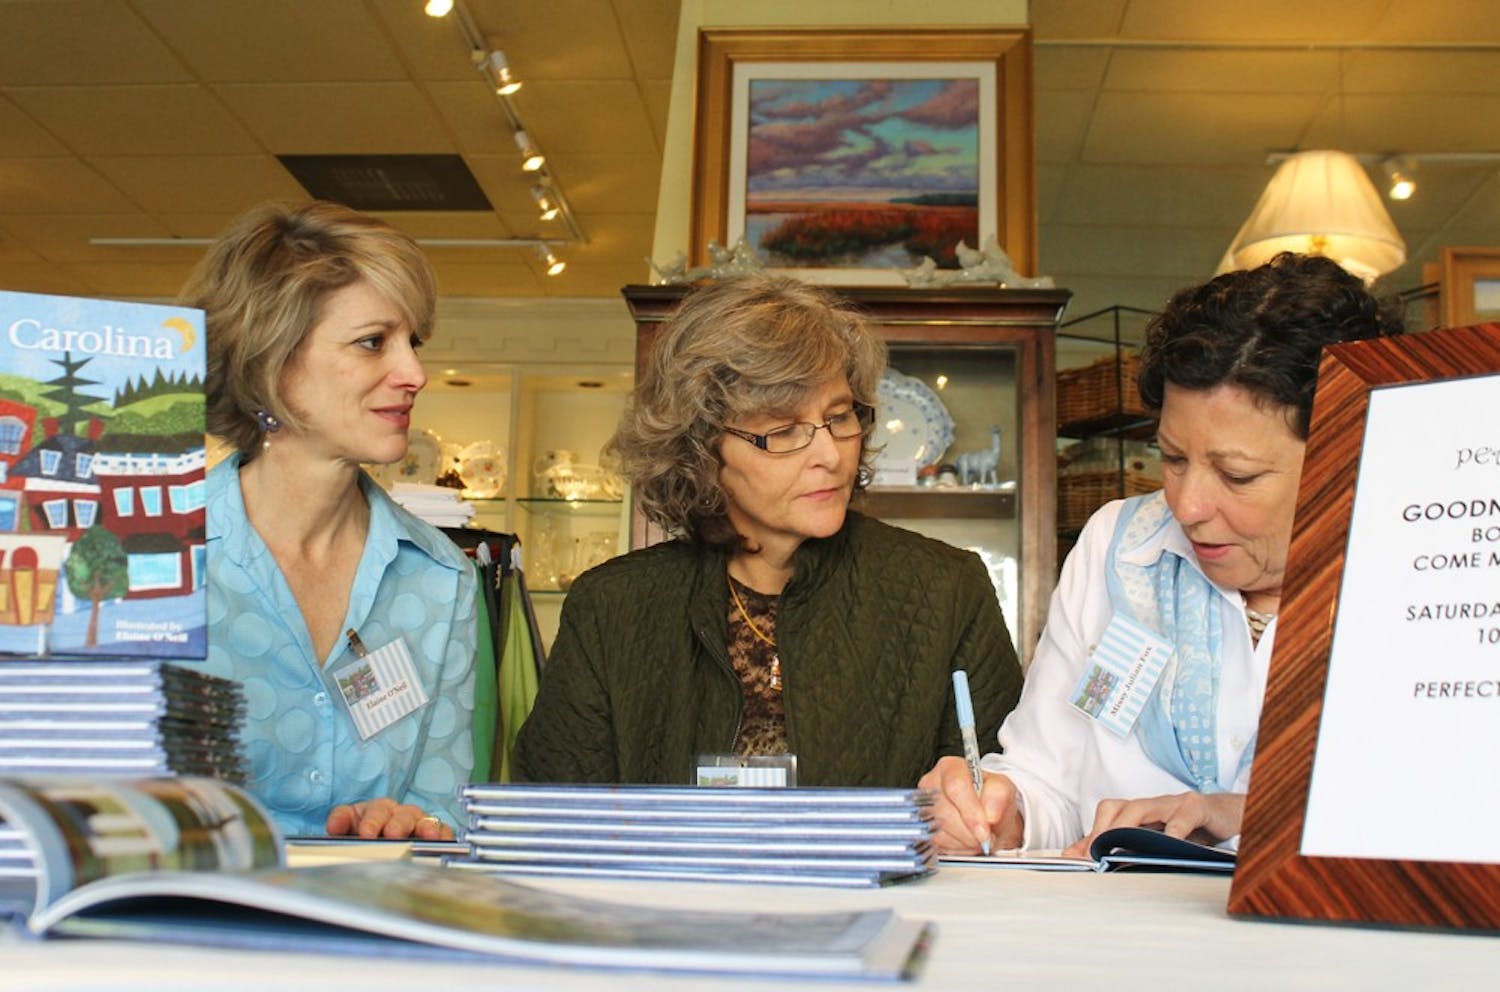 Elaine O'Neil, left, Marie Myers Lloyd and Missy Julian Fox sign copies of their book, Goodnight Carolina, at Peacock Alley Saturday morning. Marie and Missy wrote the book together while Elaine created the textile illustrations.